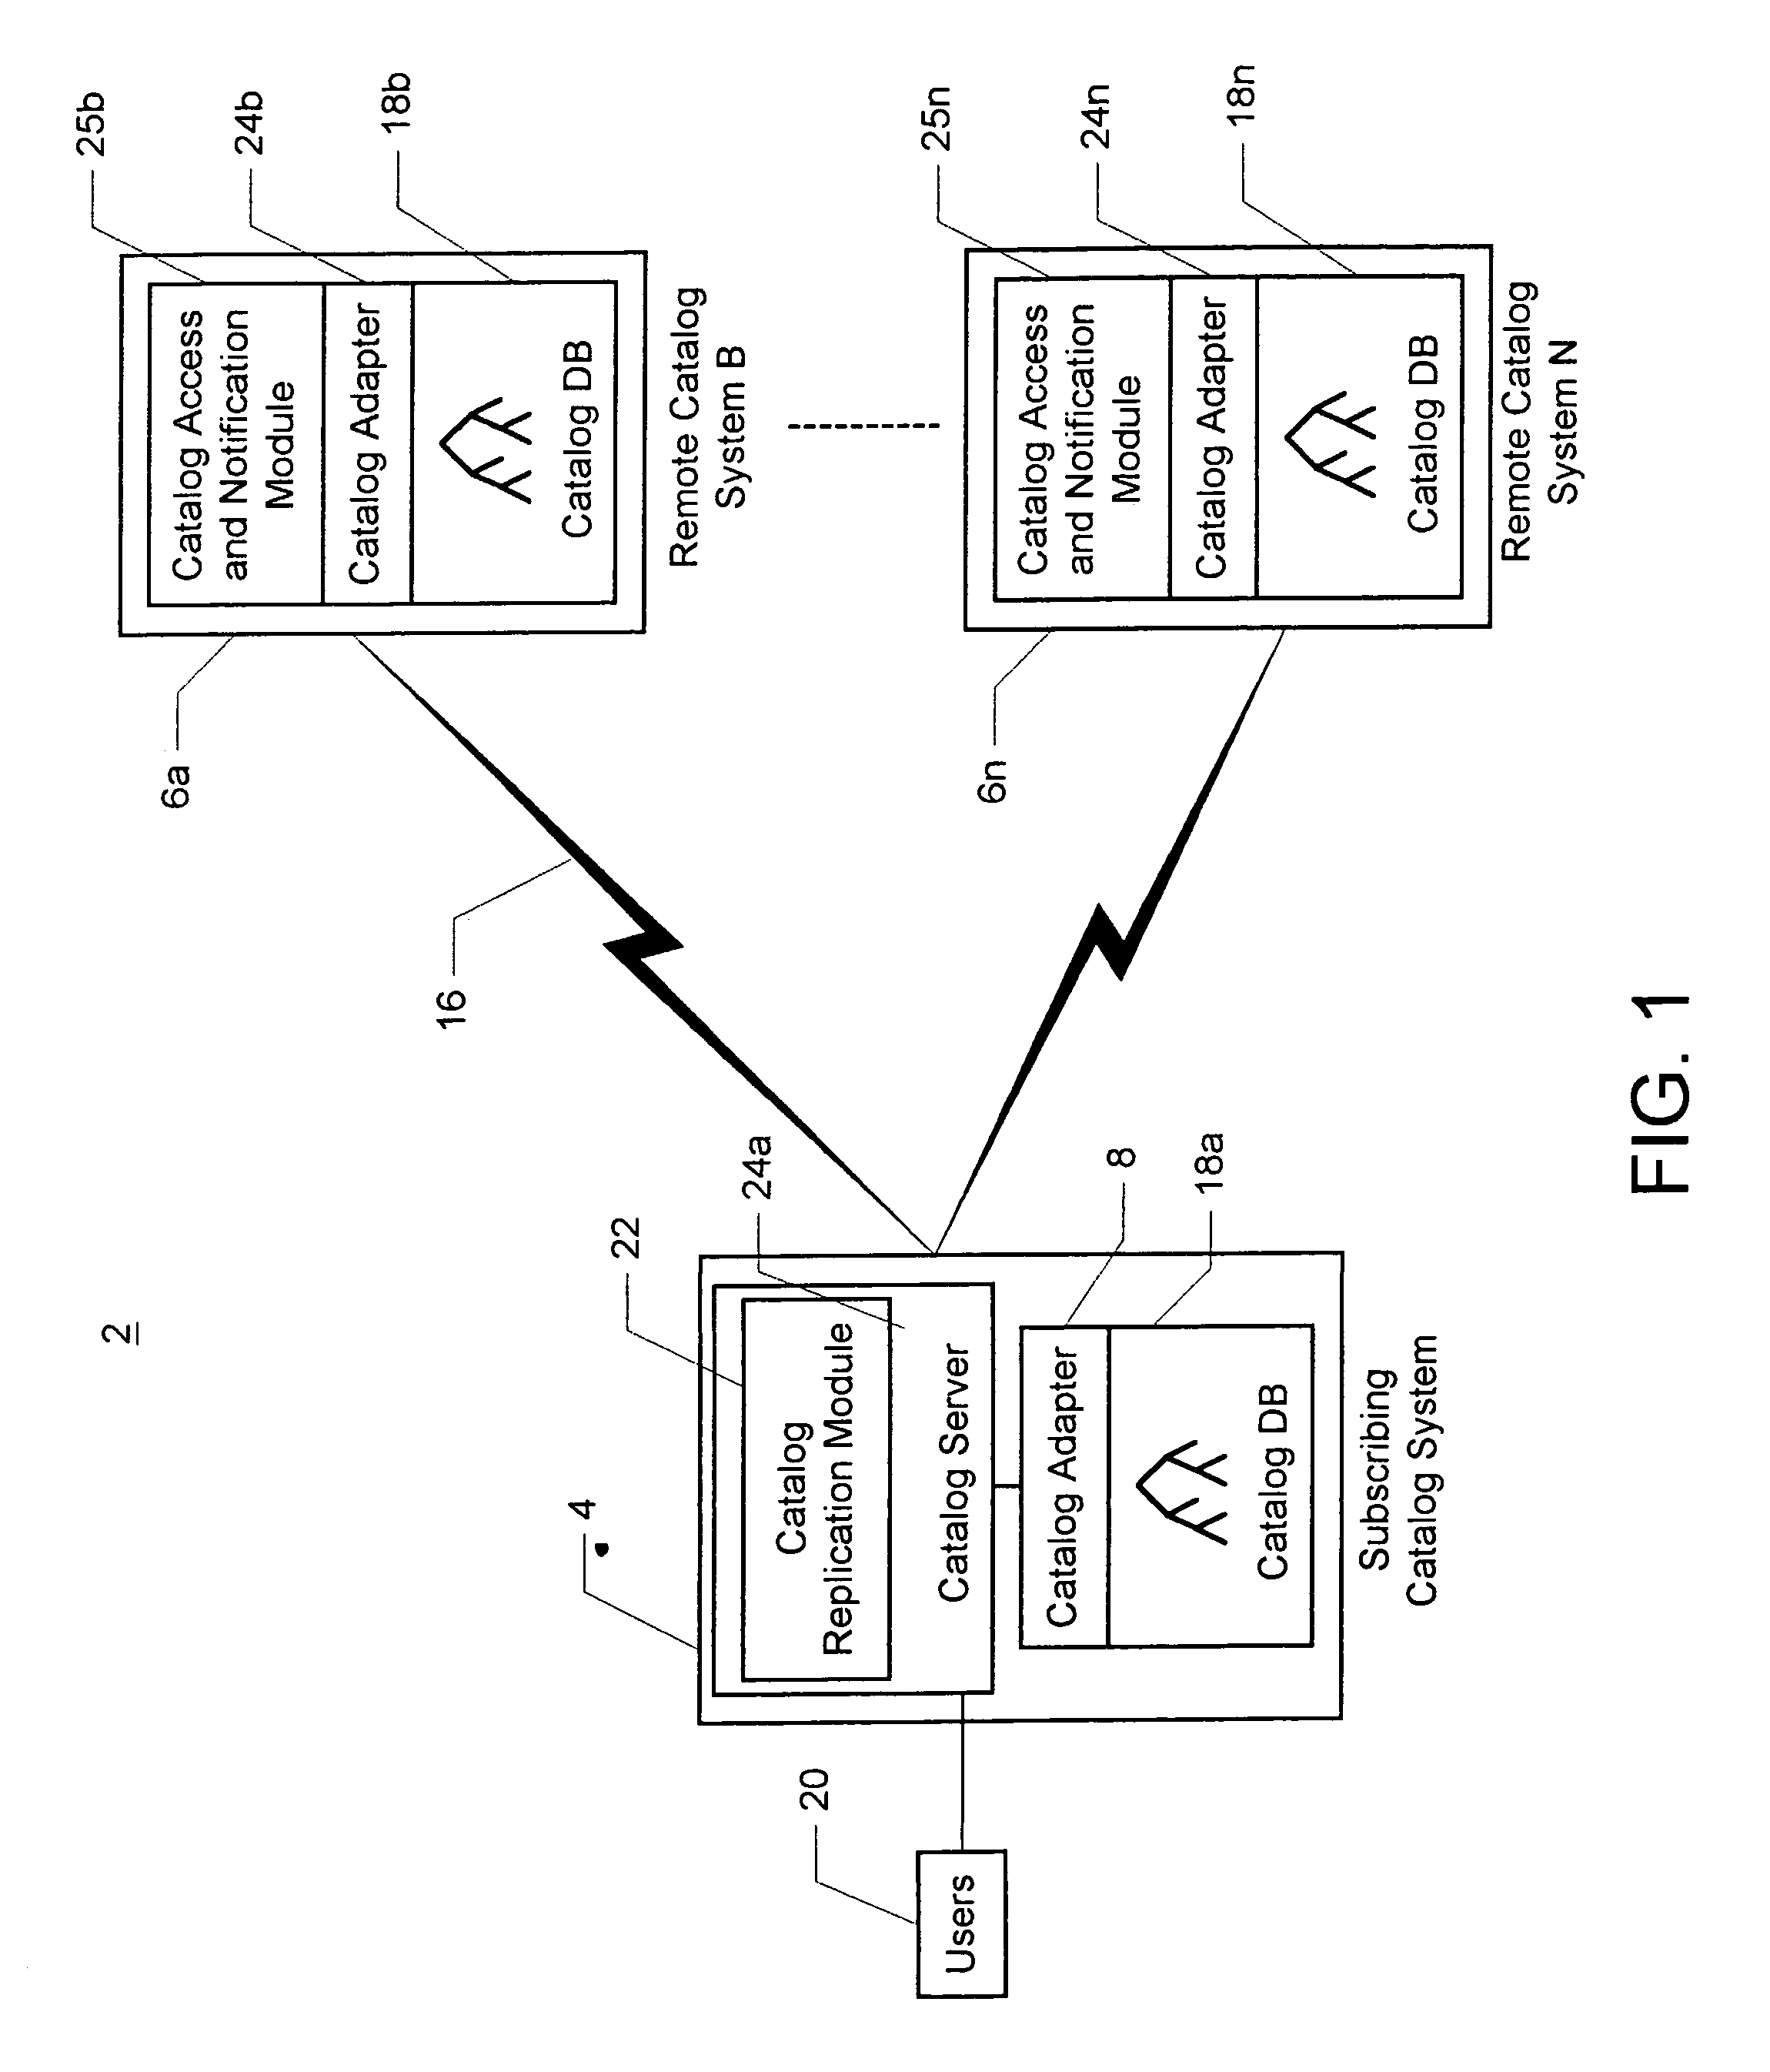 Method and system for providing virtual access to information distributed across heterogeneous catalog servers